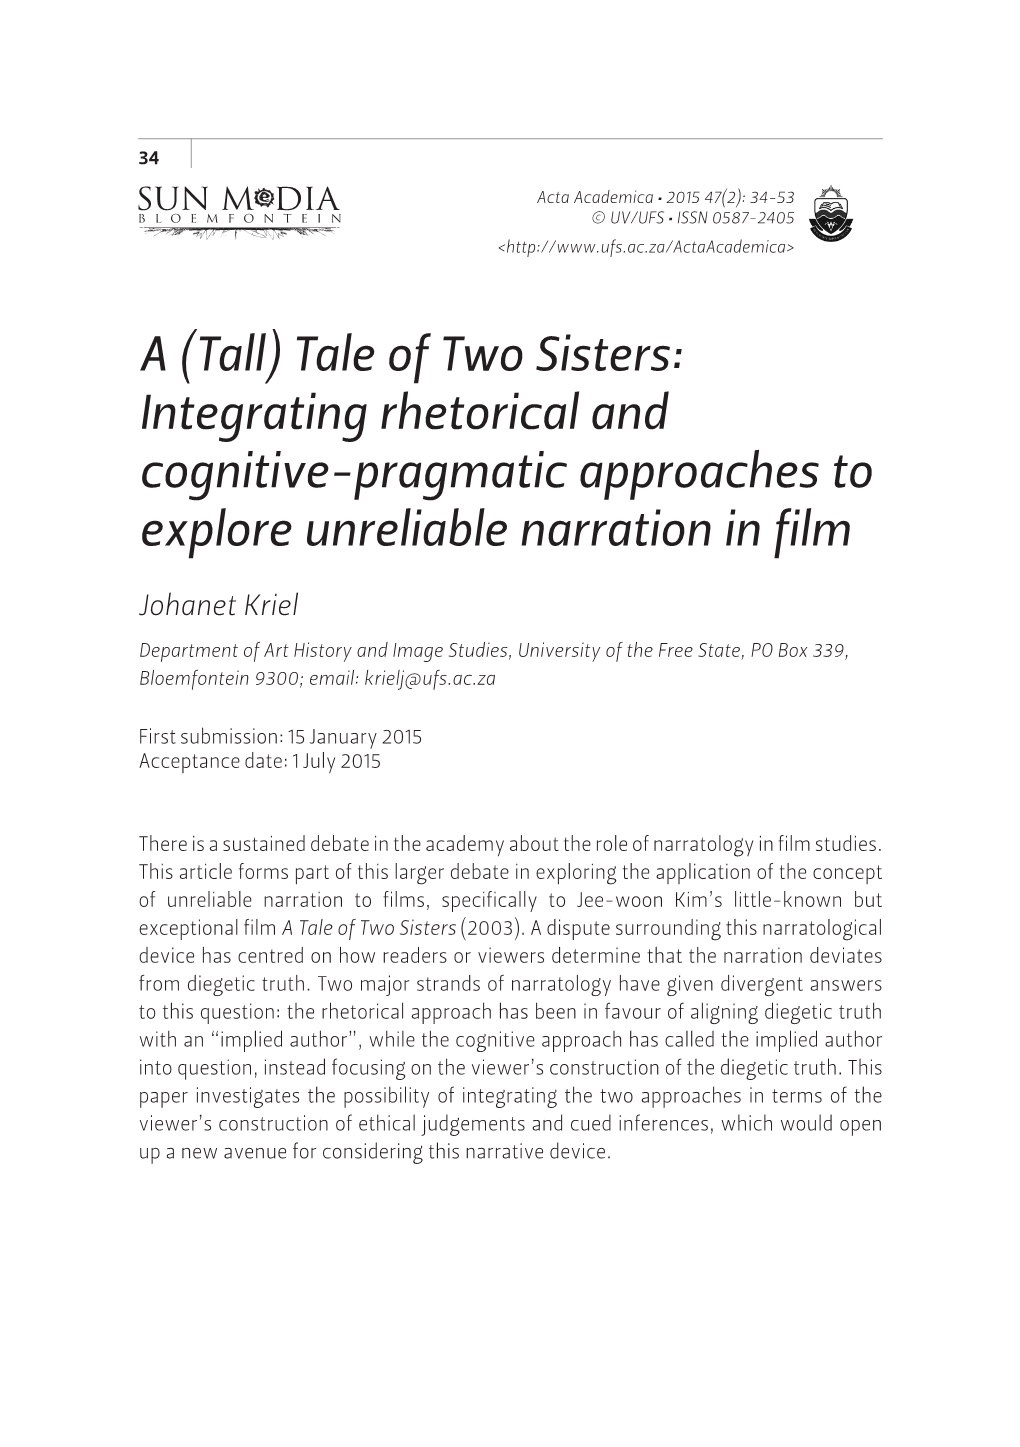 Integrating Rhetorical and Cognitive-Pragmatic Approaches to Explore Unreliable Narration in Film